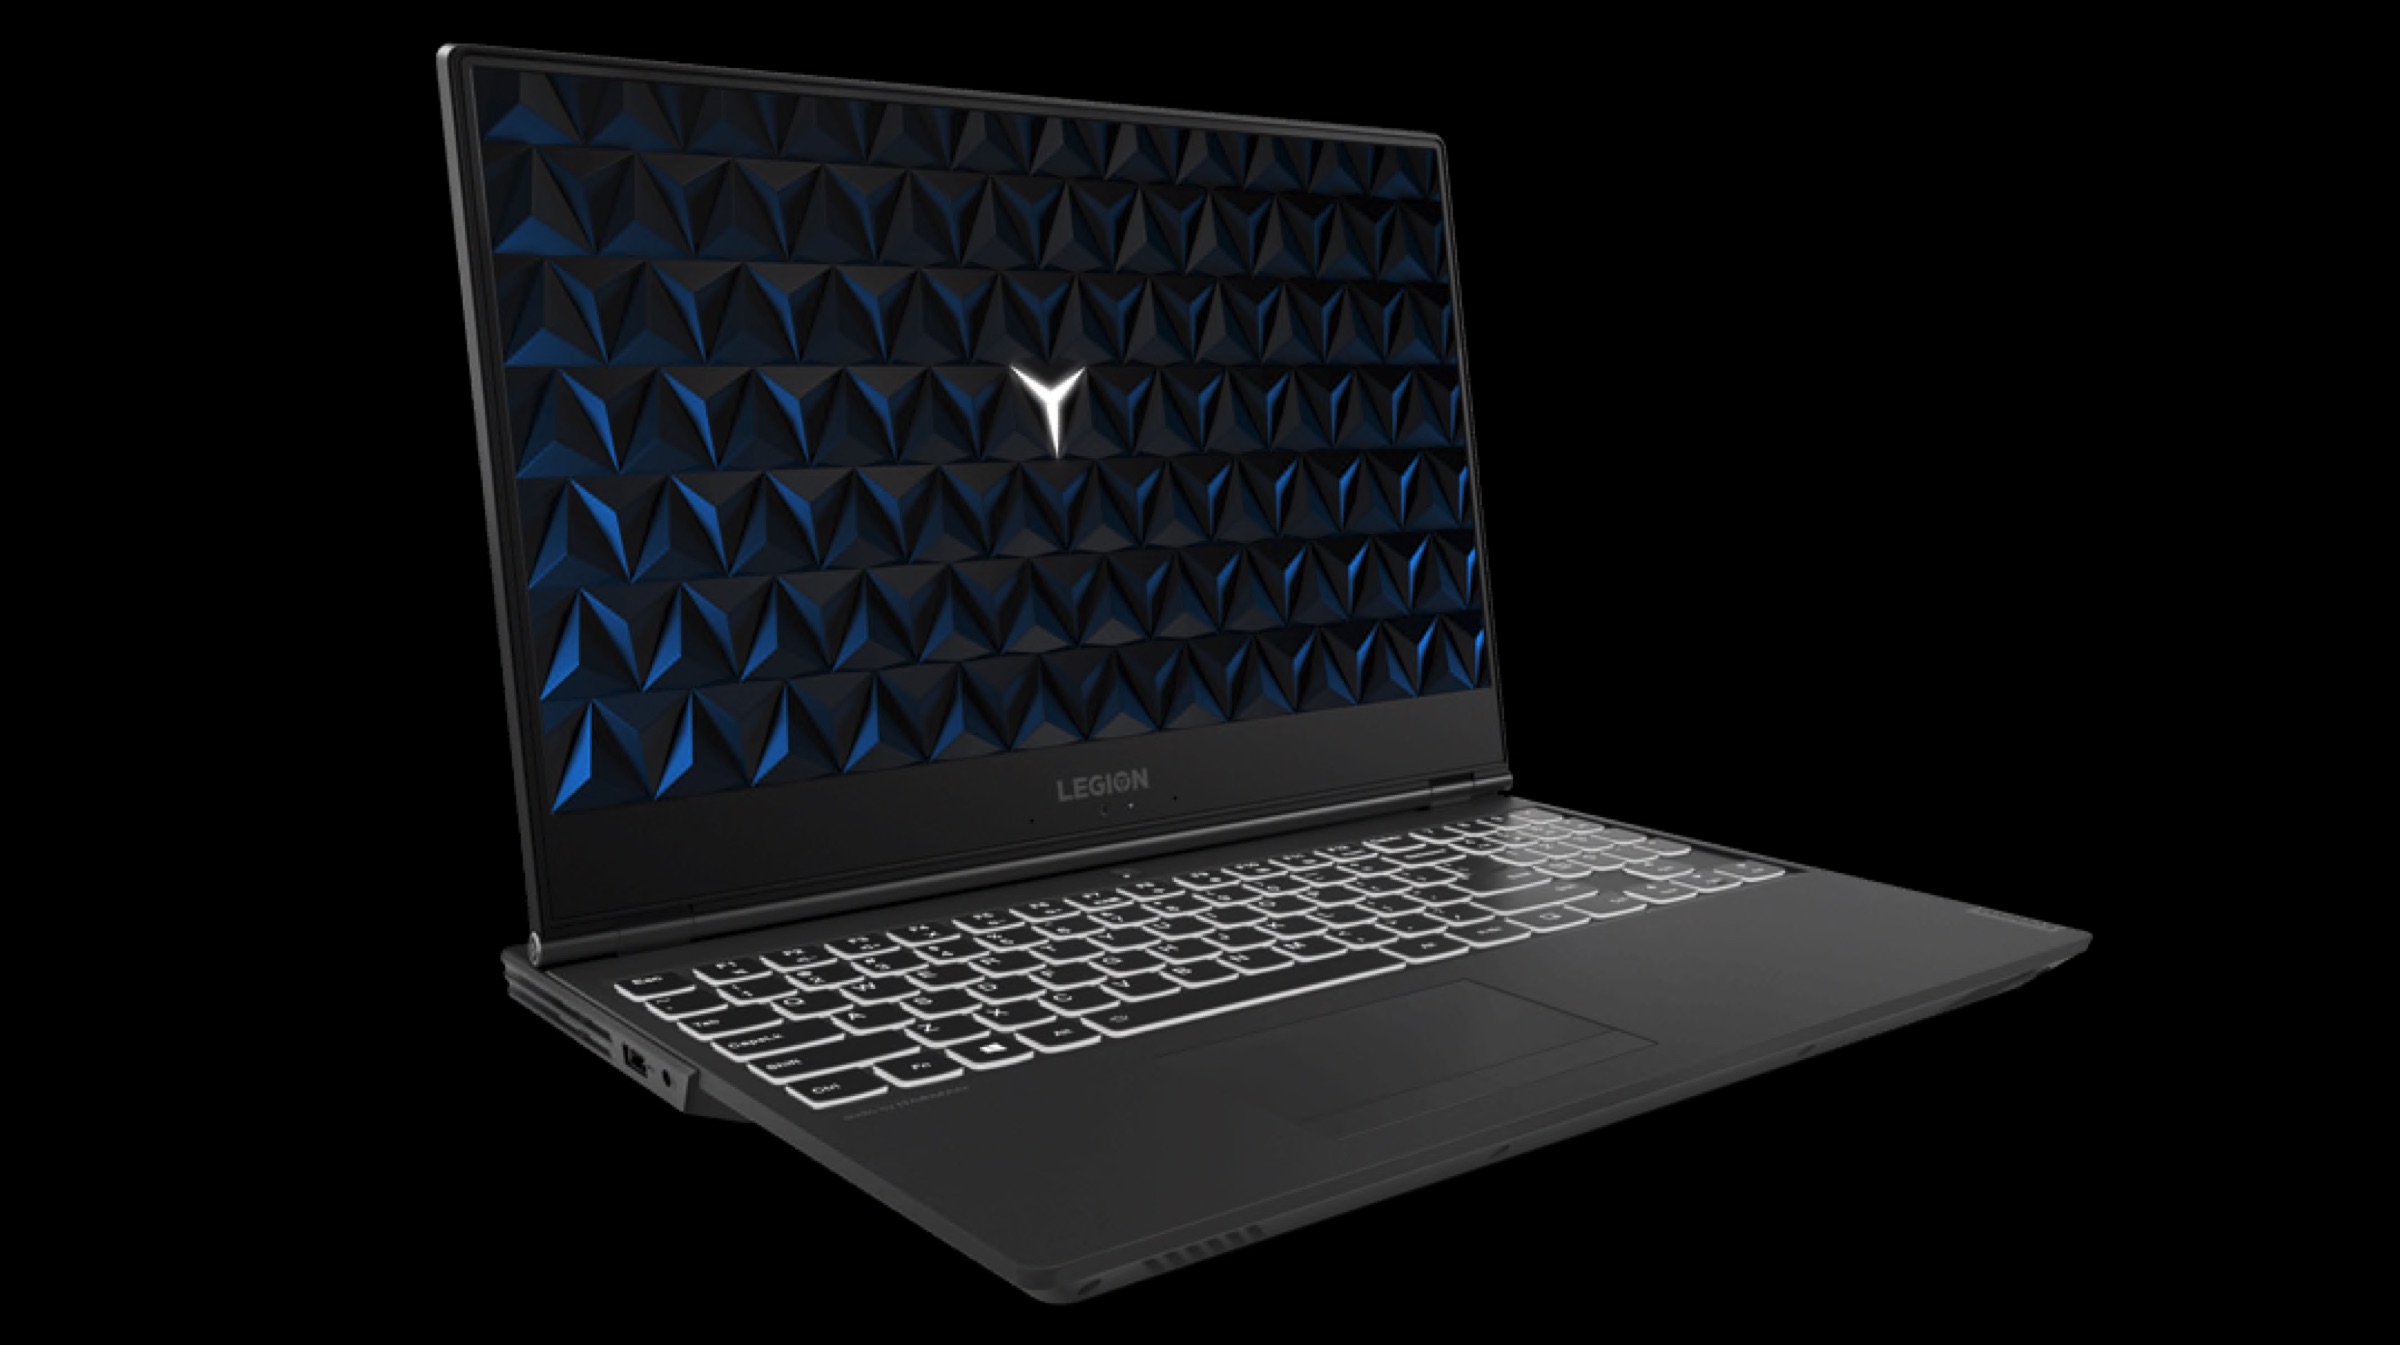 Lenovo Legion Y740 & Y540 Gaming Laptops Launched In India | iGyaan